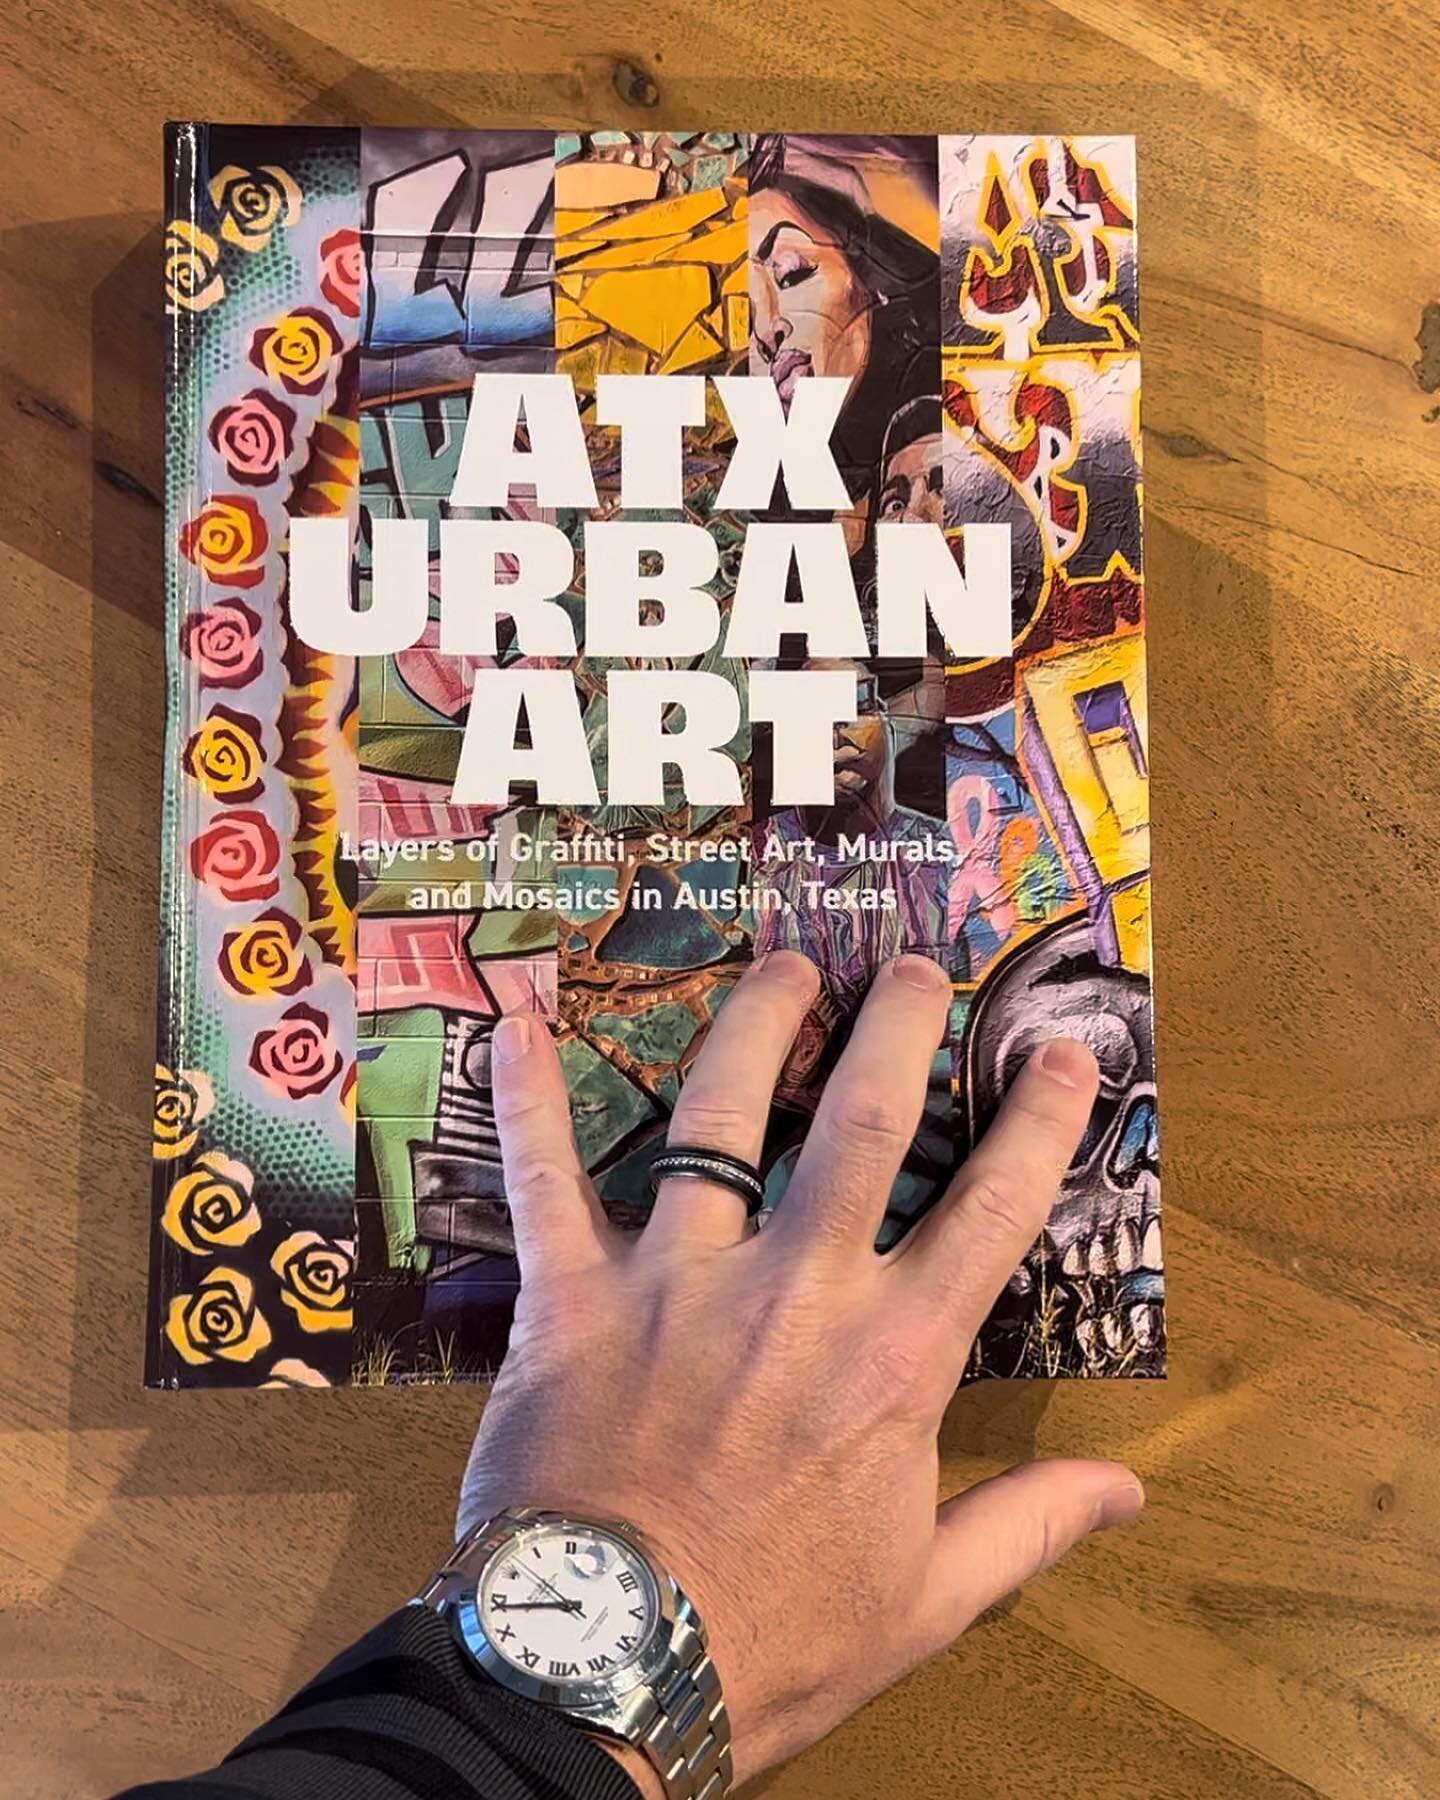 Unboxing day. Just received copies of this amazing book from @atxurbanart. Huge congrats to everyone who worked on this project. Shoutout especially to our boy @jmuzacz on what has to be one of the most robust and finest compilations of graffiti, str